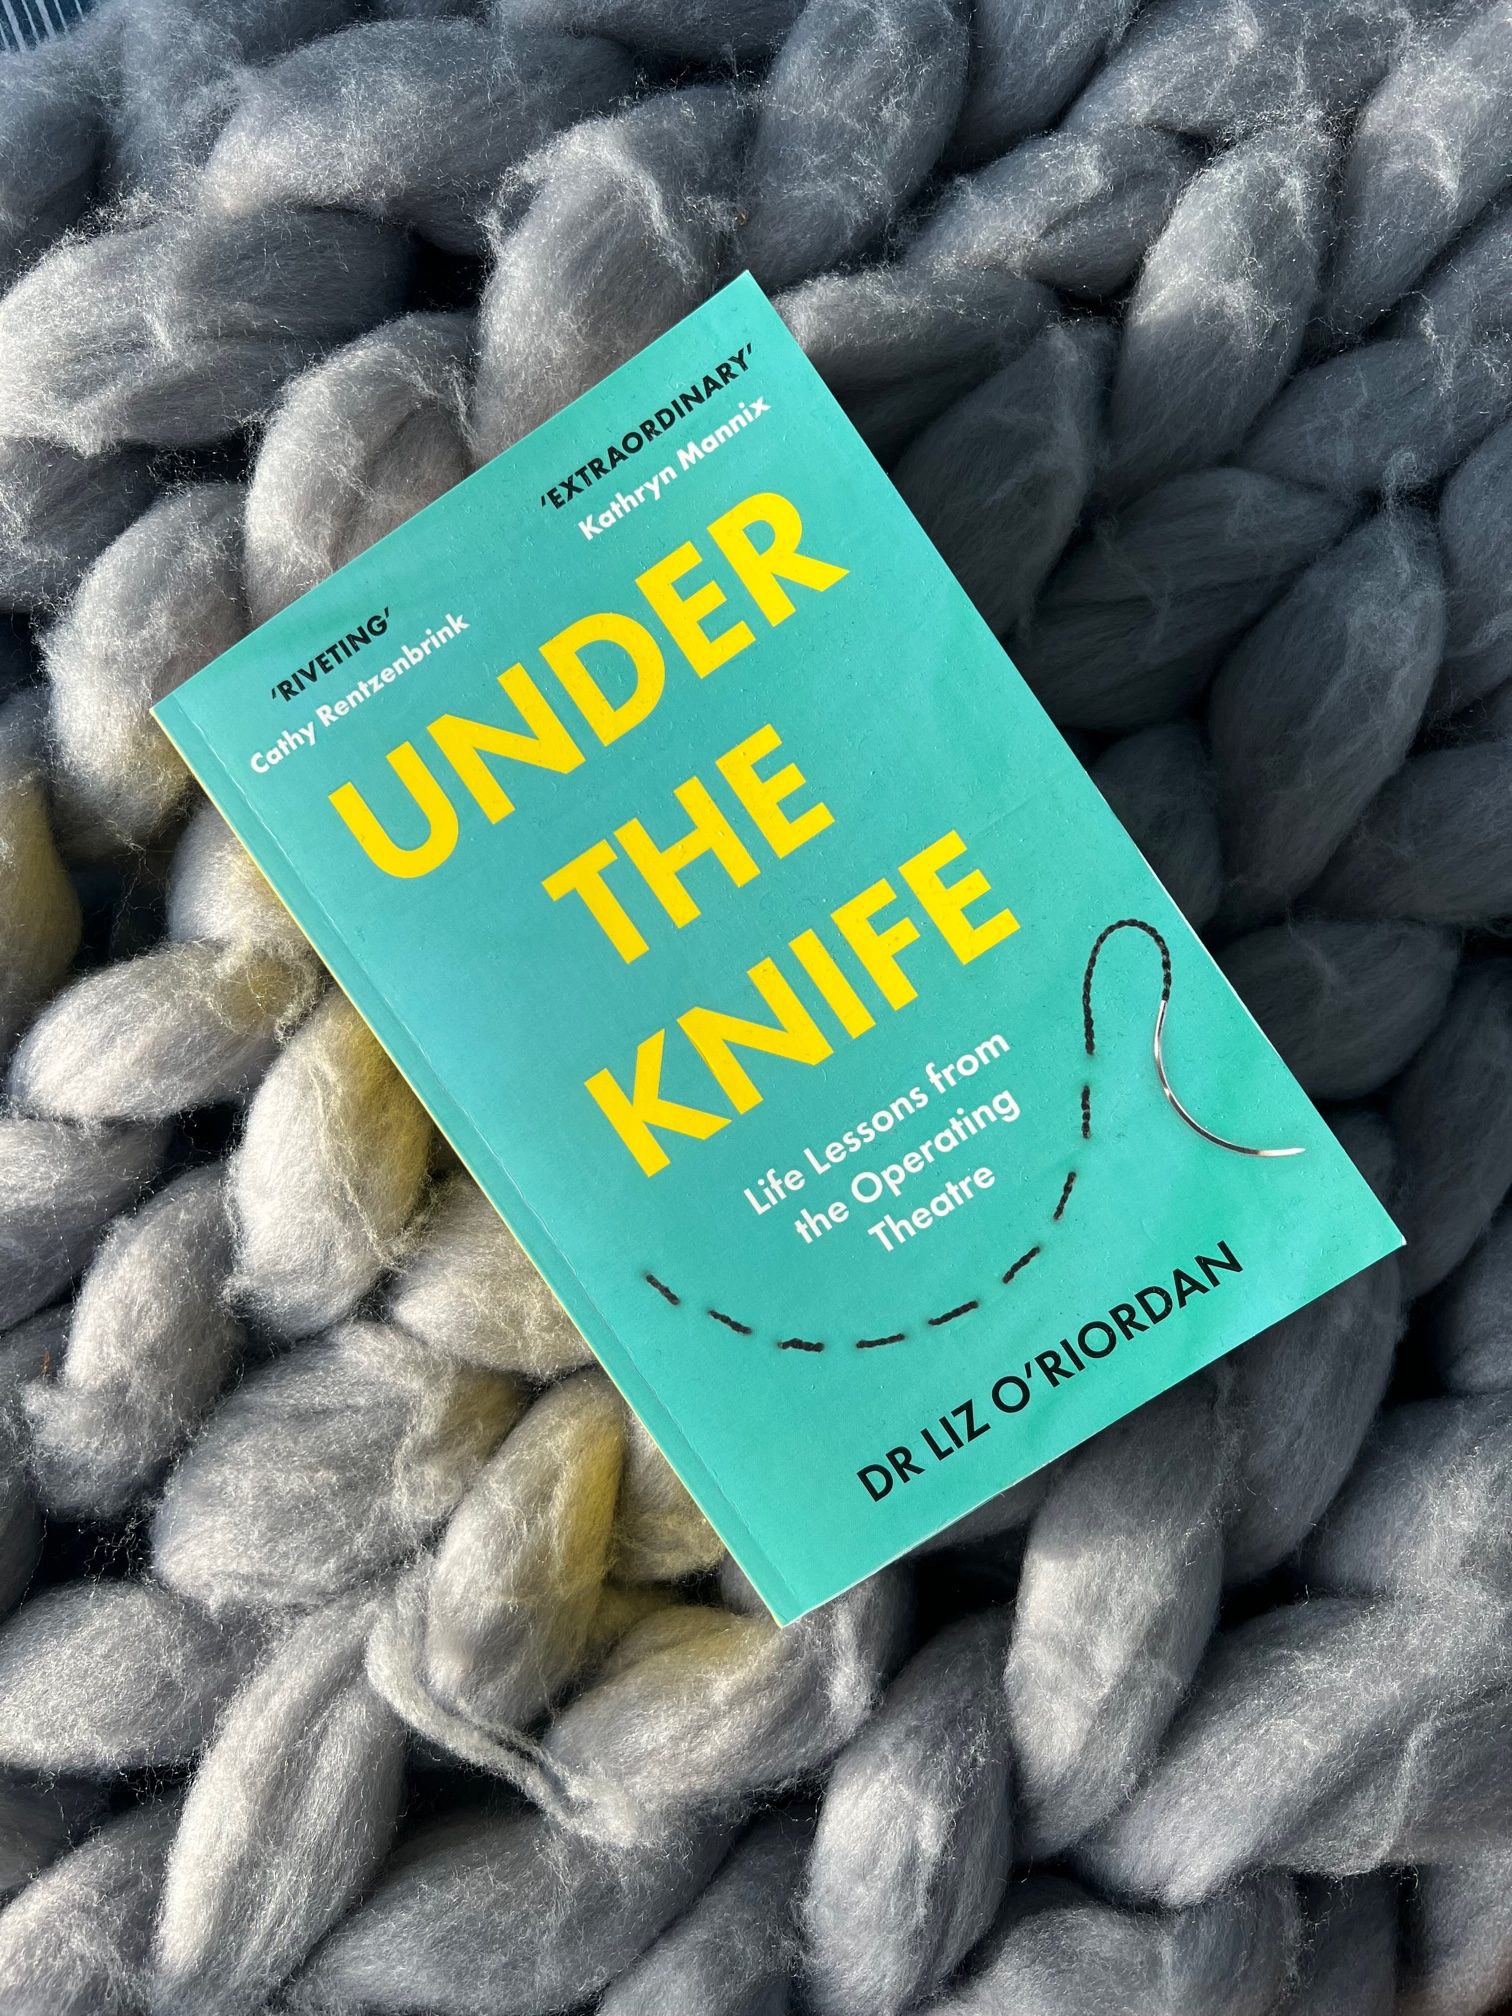 Paperback book "Under the Knife" by Liz O'Riordan sits on a chunky knitted blanket